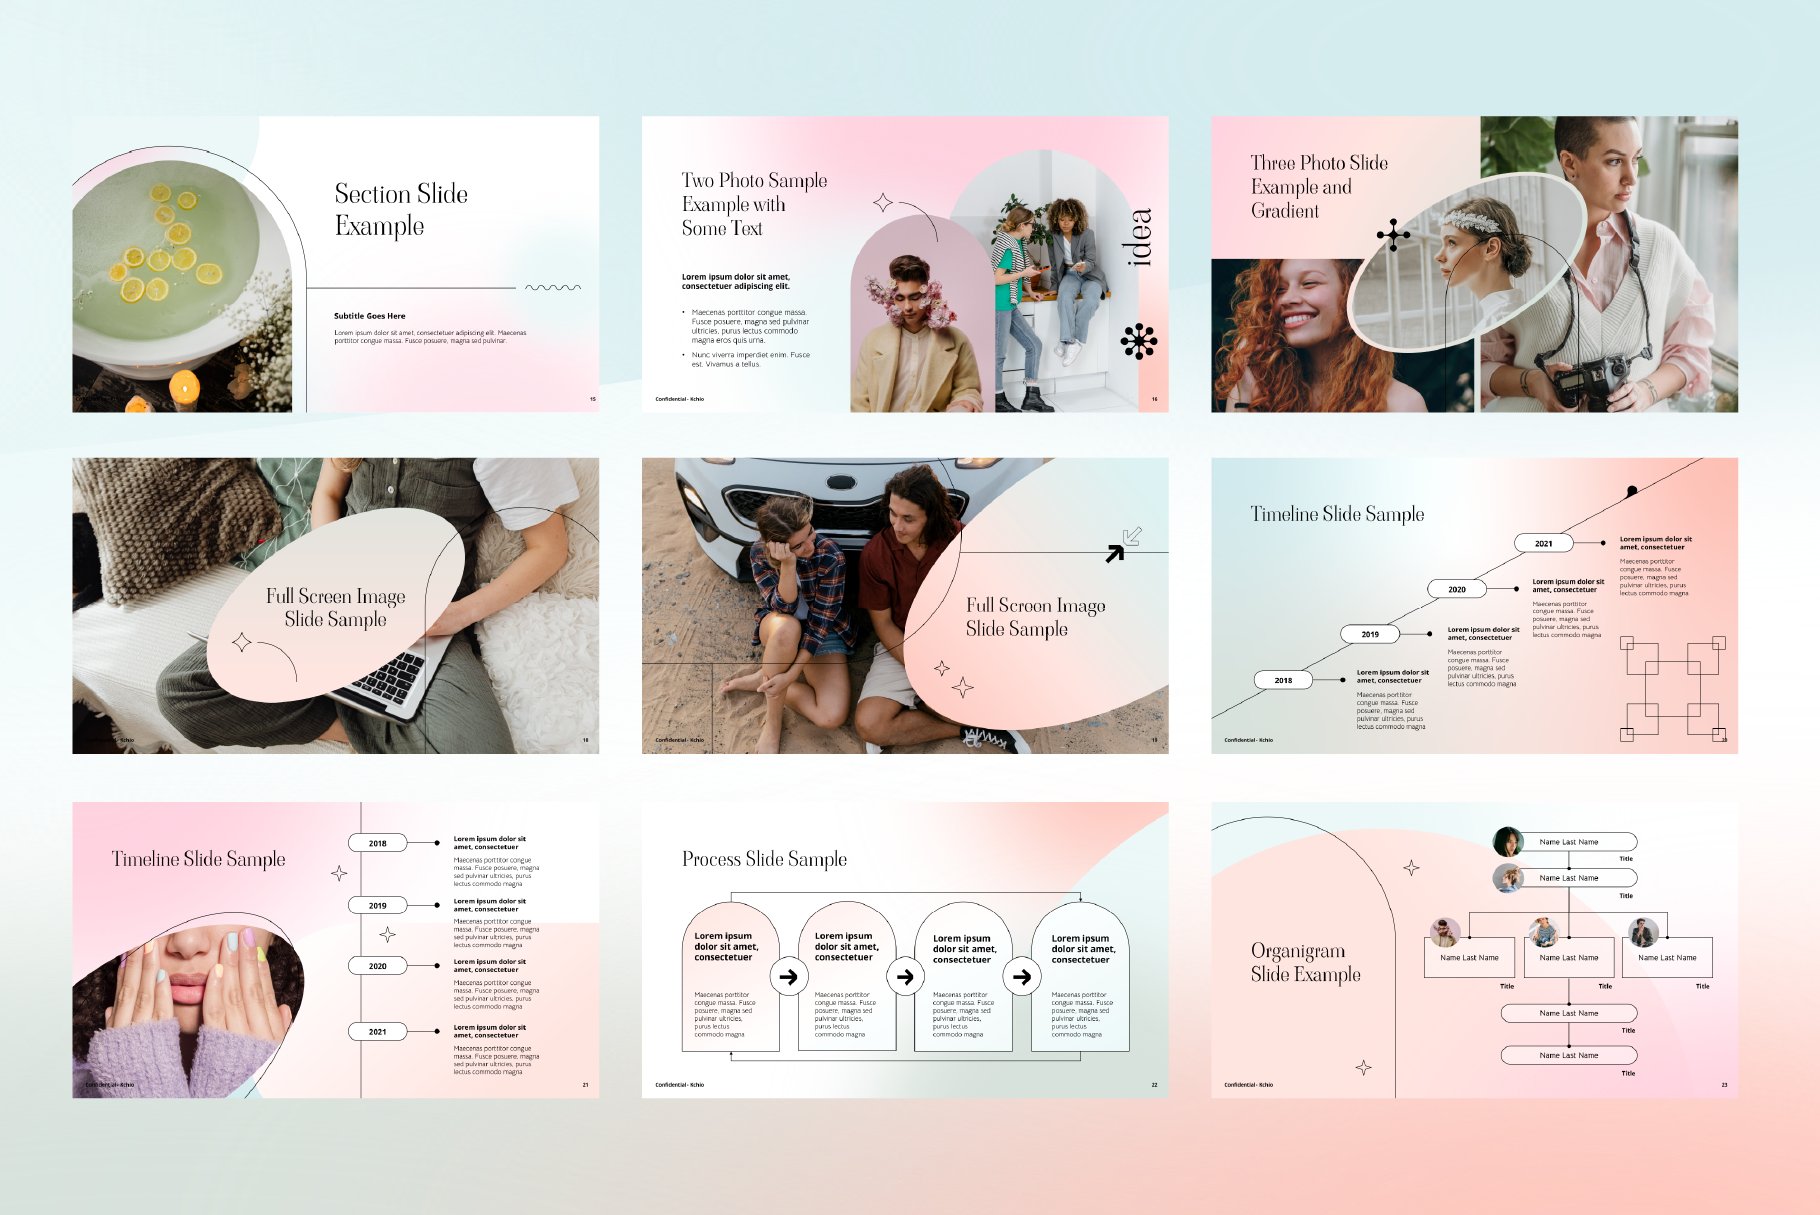 Cool stylish template in pink gradient.